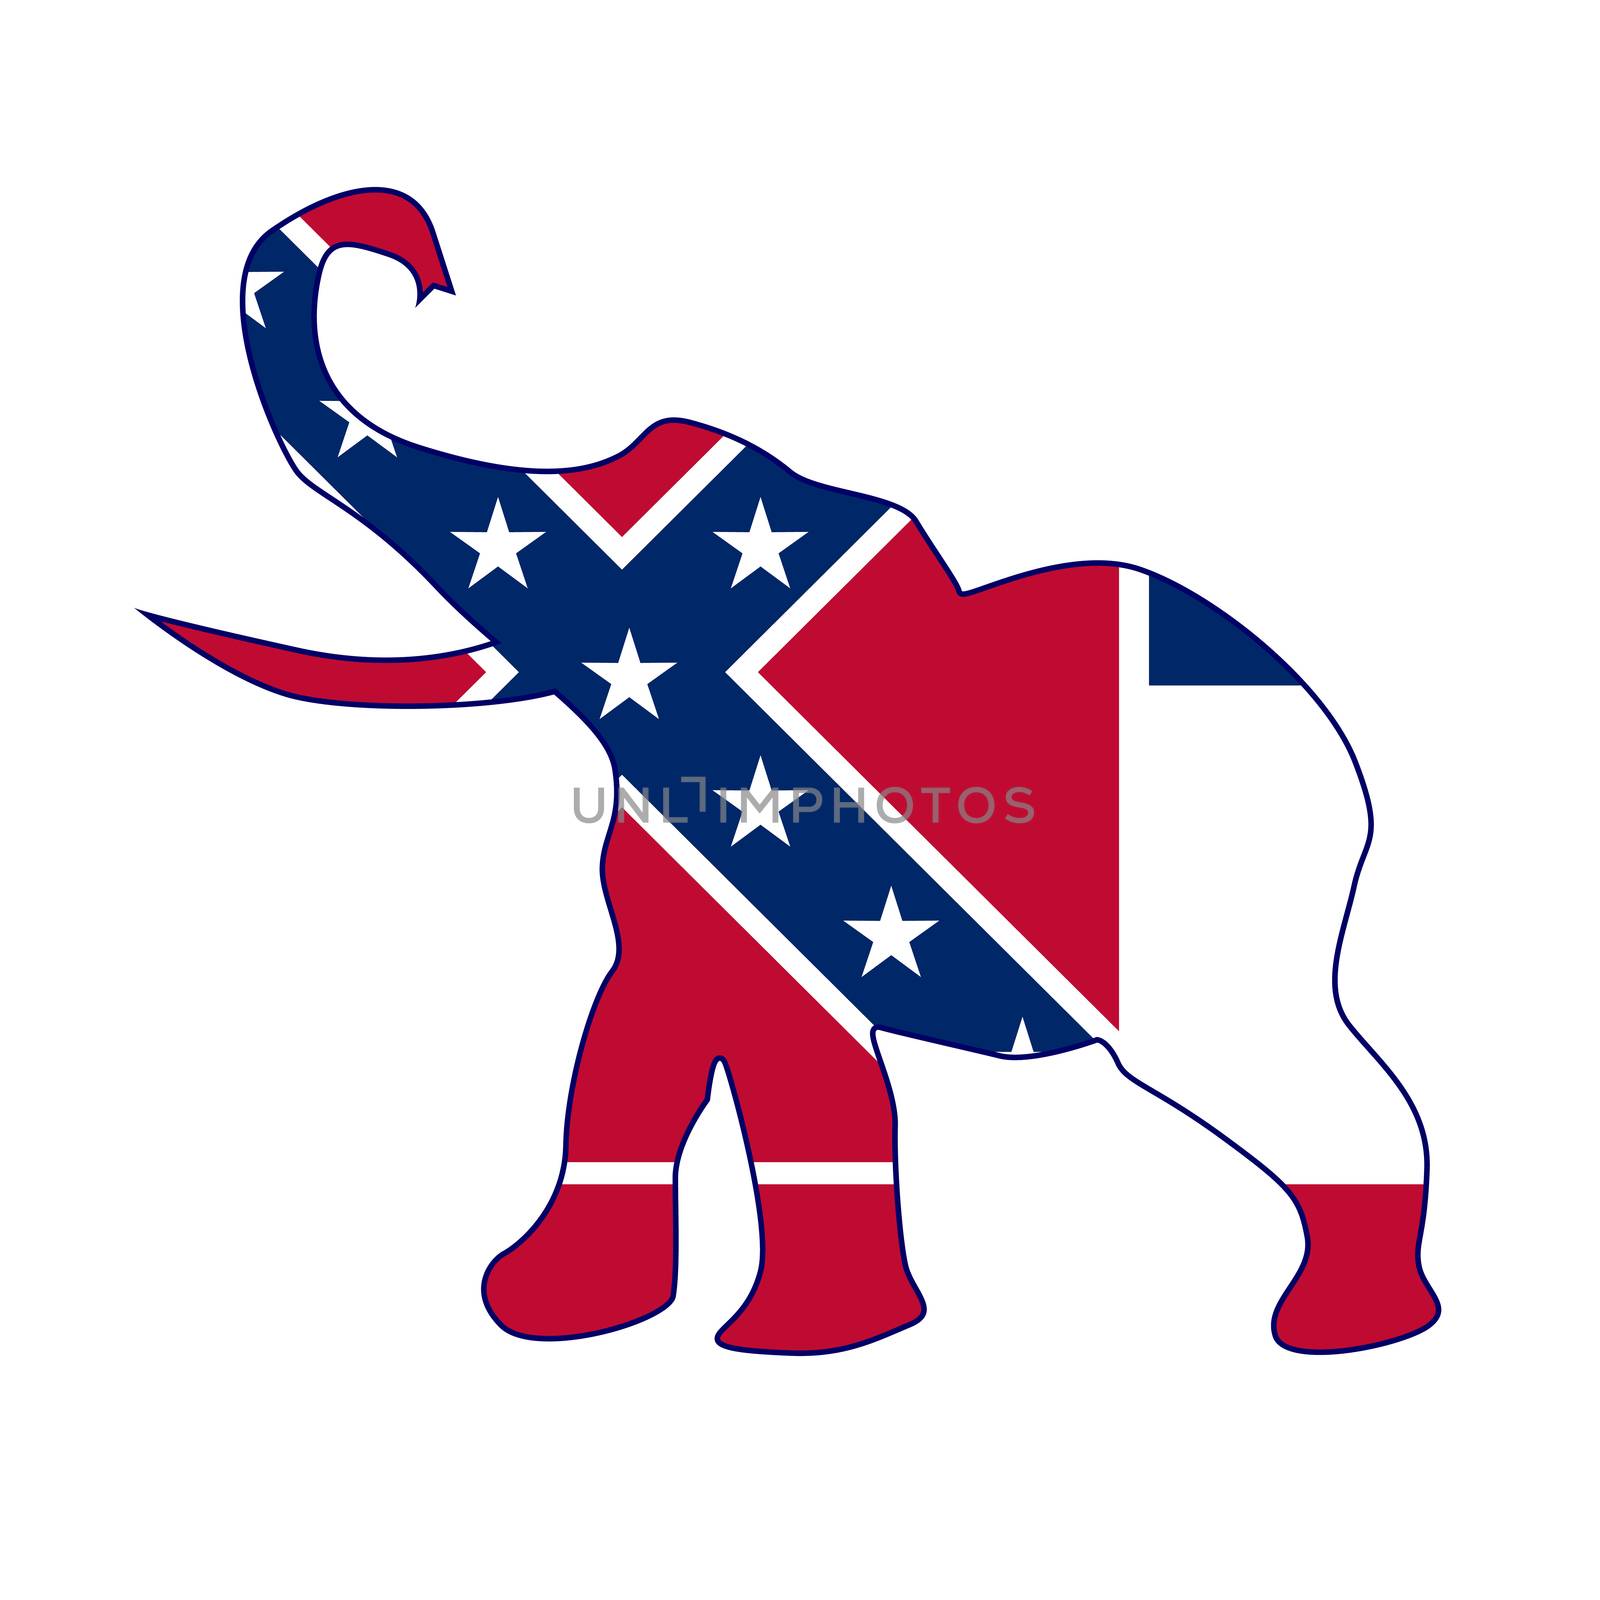 The Mississippi Republican elephant flag over a white background